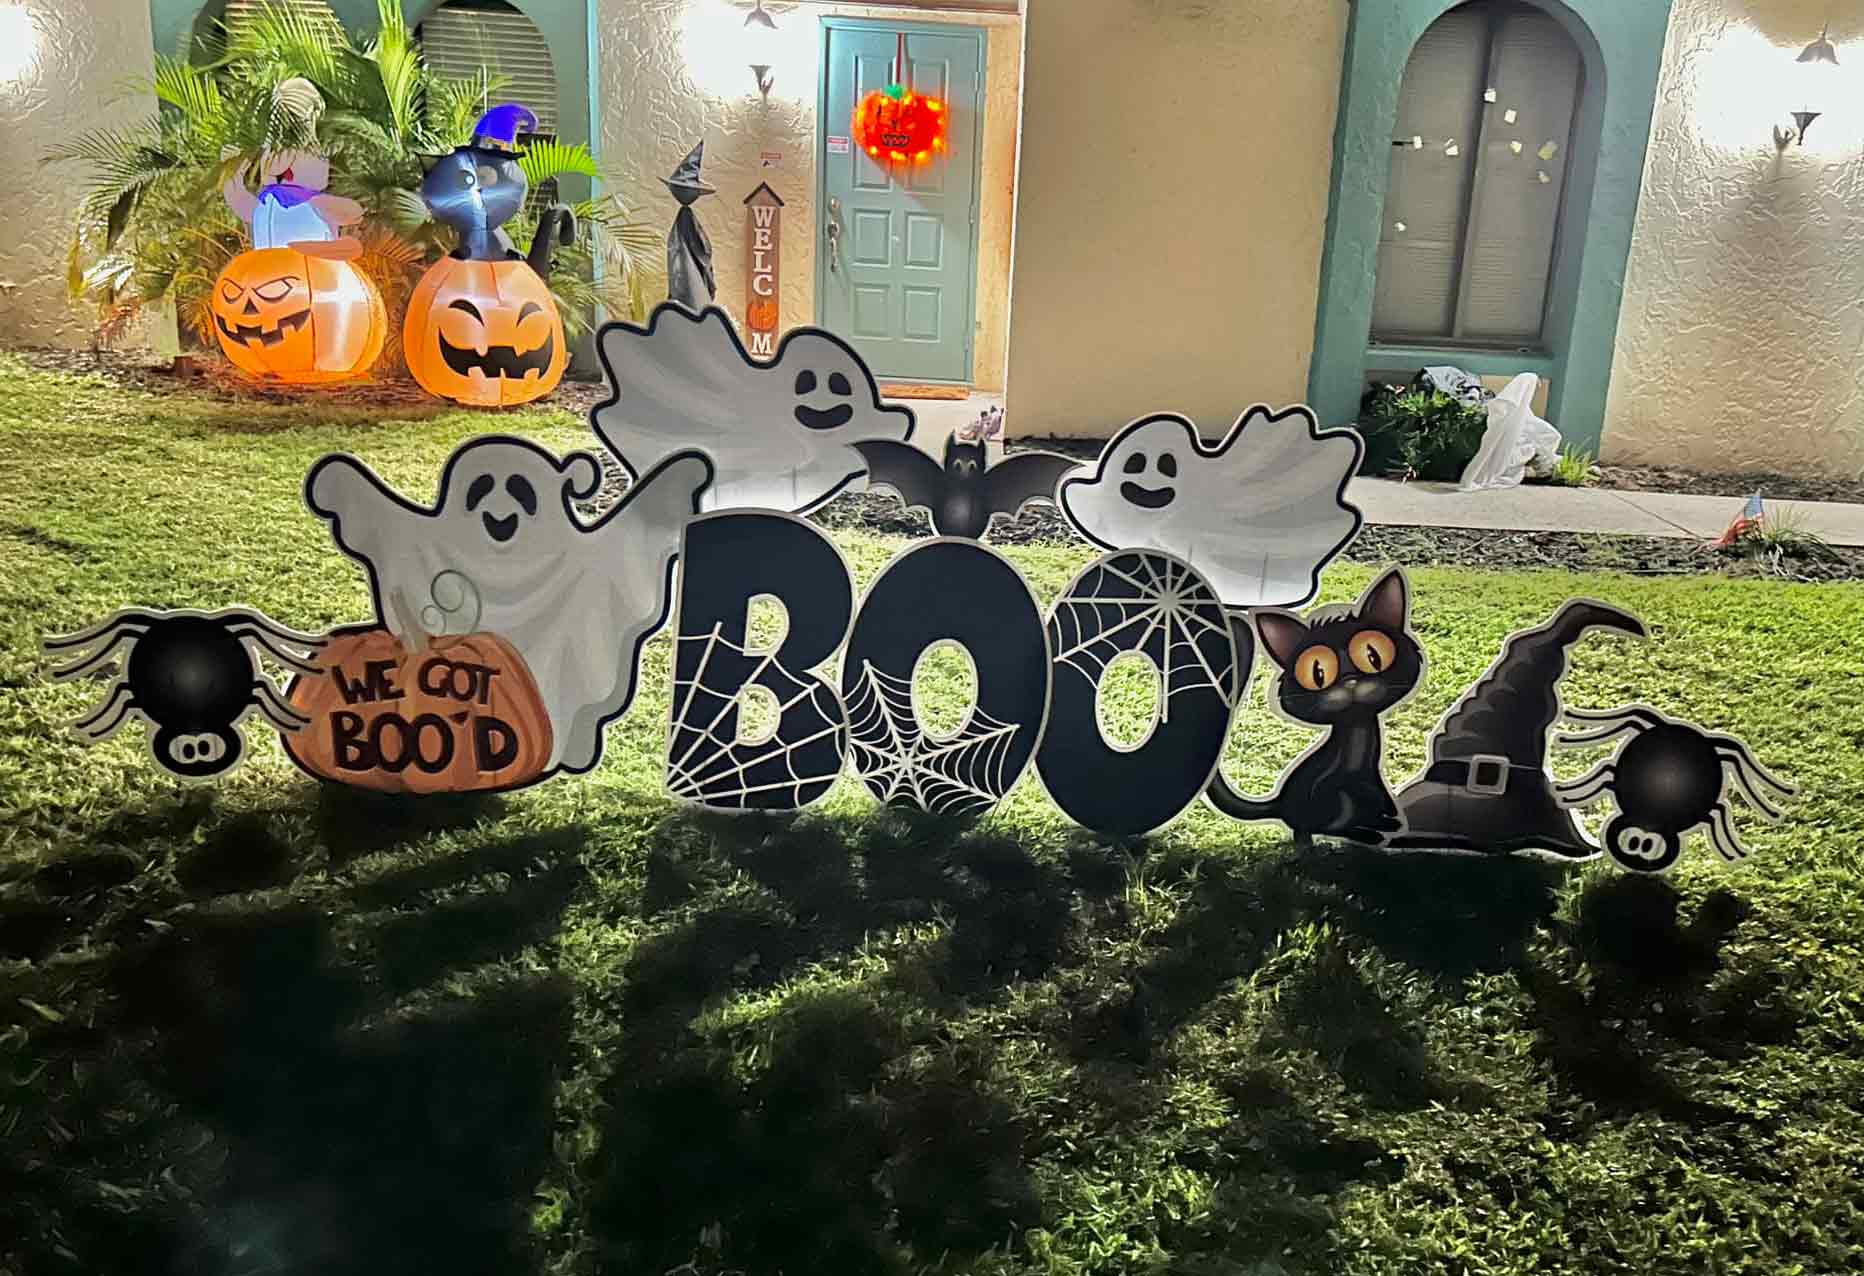 Halloween decoration BOO letters with ghosts in the yard